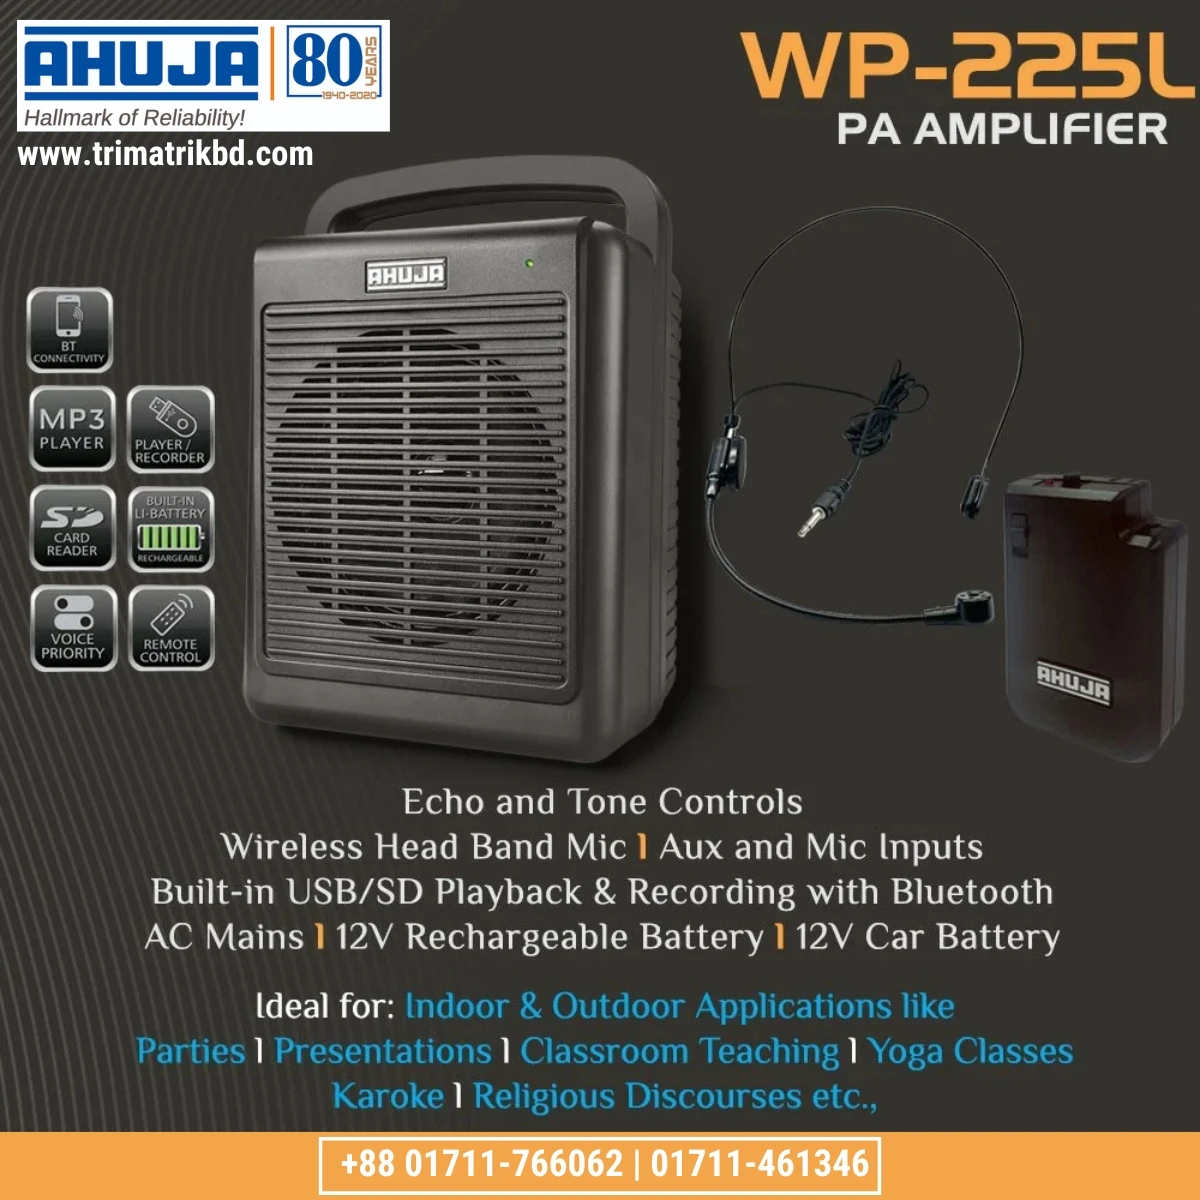 Ahuja WP-225L Portable PA System with Wireless Head-Band Mic, Bluetooth, Mp3 Player Etc